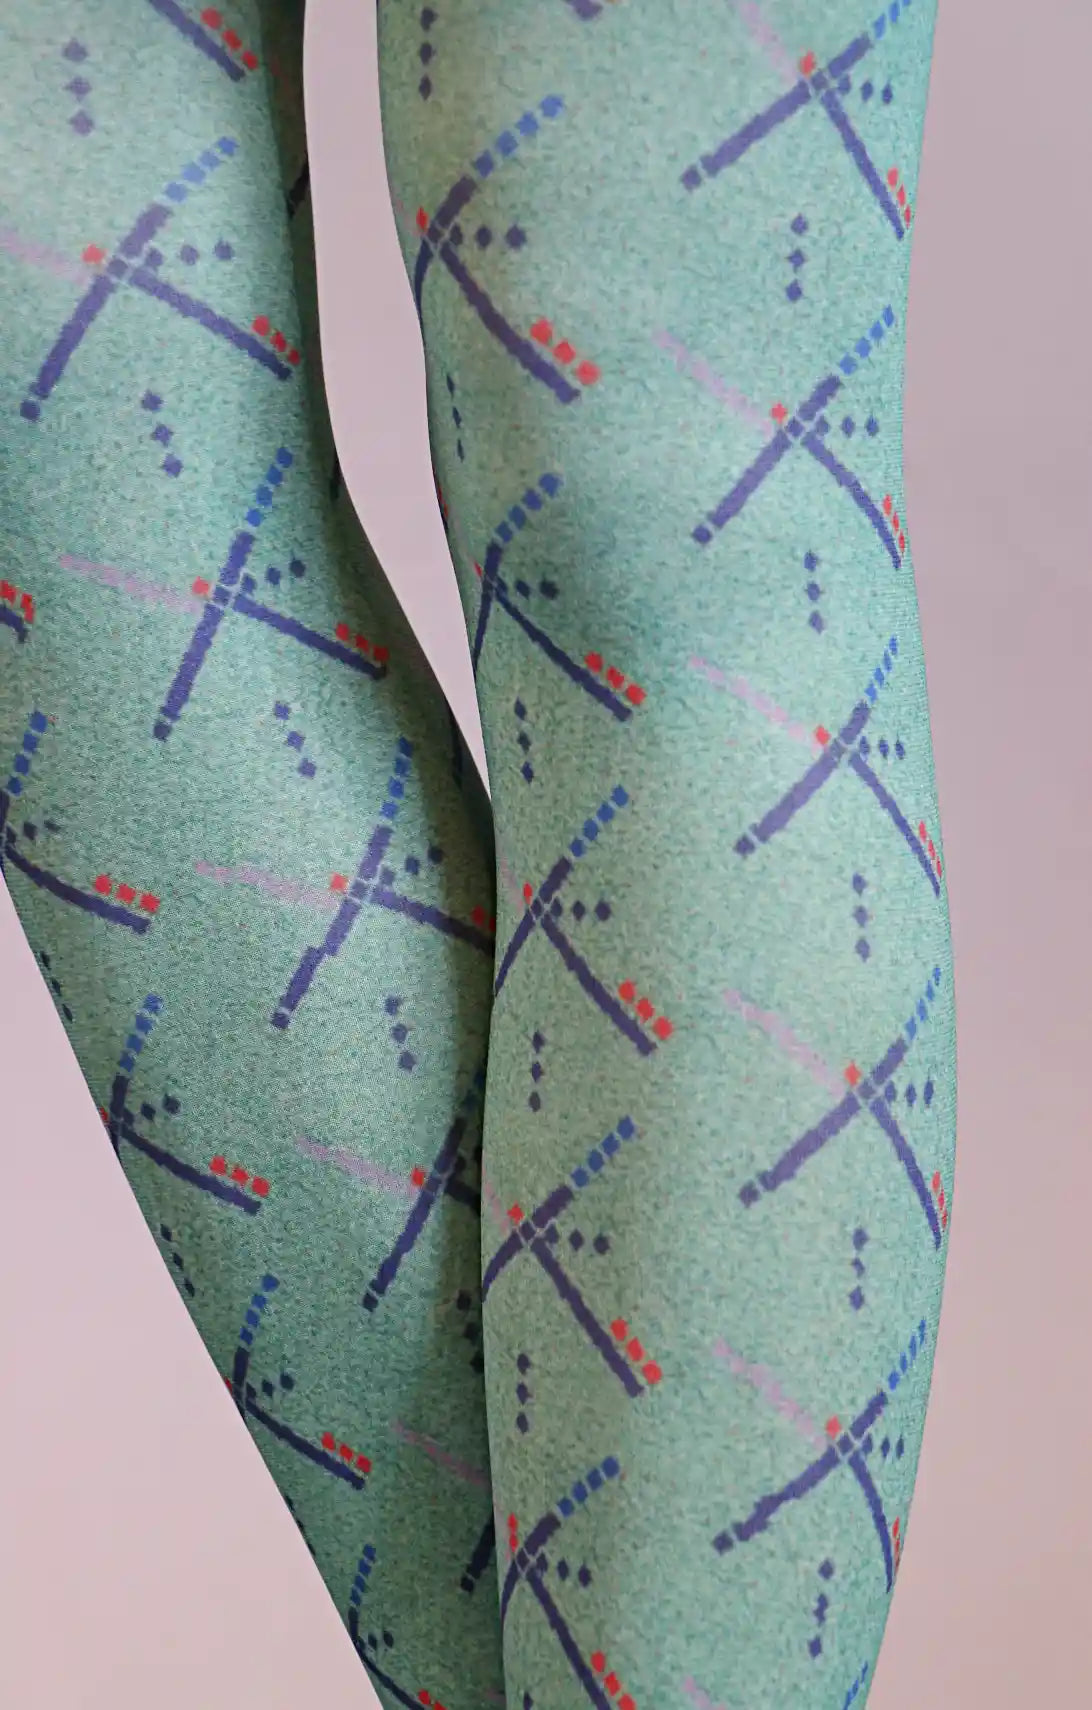 TABBISOCKS brand PDX Carpet Patterned Tights, enlarged view of the knee area of a woman's leg wearing tights that are emerald green in color with an overall PDX Carpet pattern